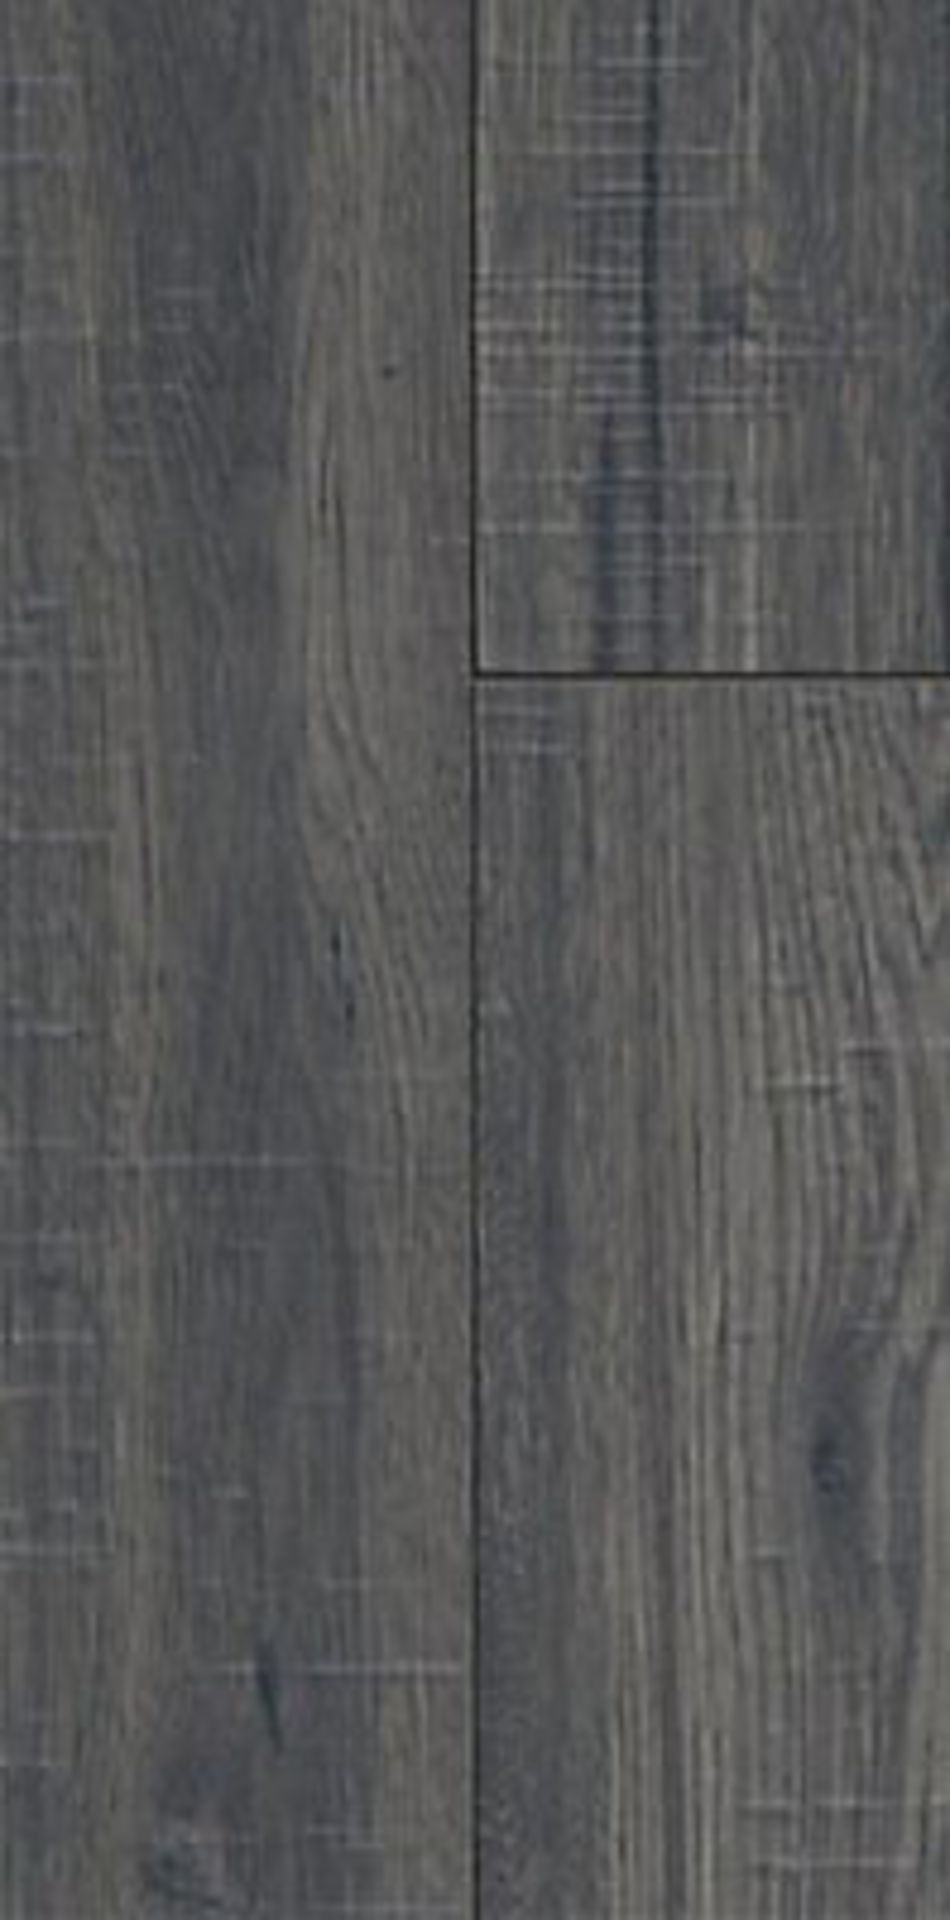 NEW 17.6M2 Ostend Natural Berkeley effect Laminate flooring, 10mm thick, 159x1383mm per piece. - Image 2 of 2